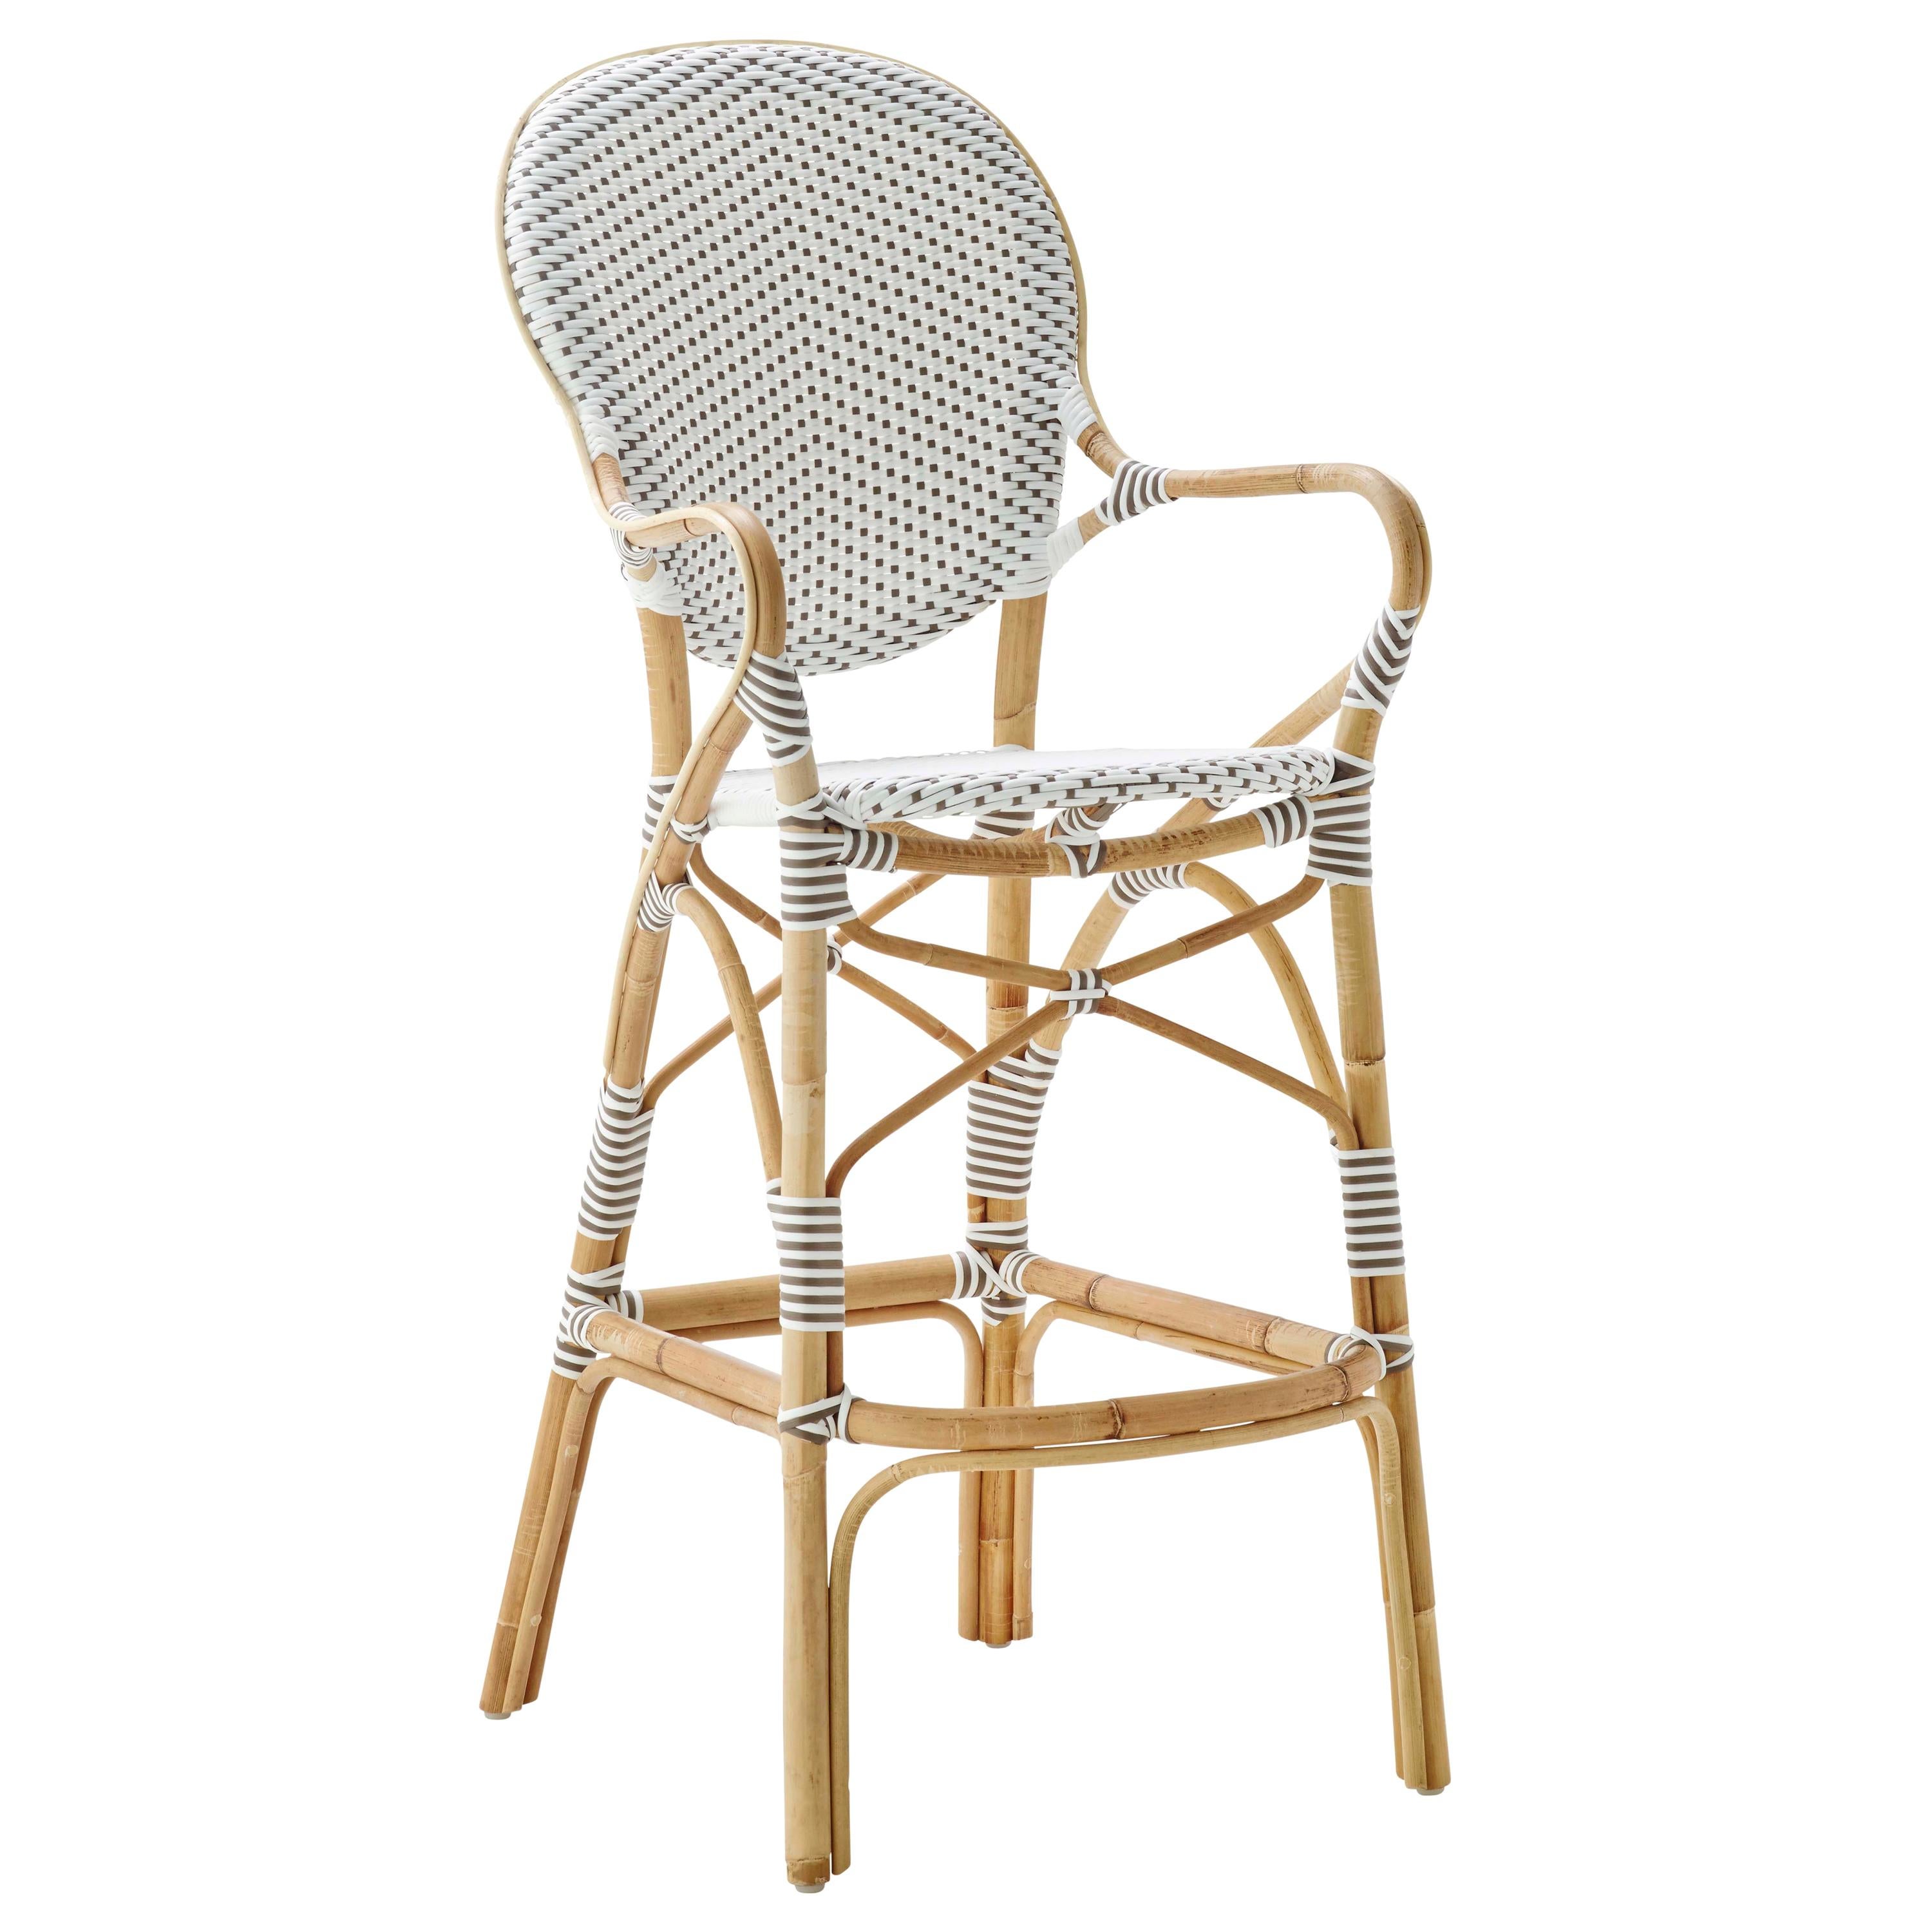 Sika Design Isabell Woven Rattan Bistro Bar Stool in White with Cappuccino Dots